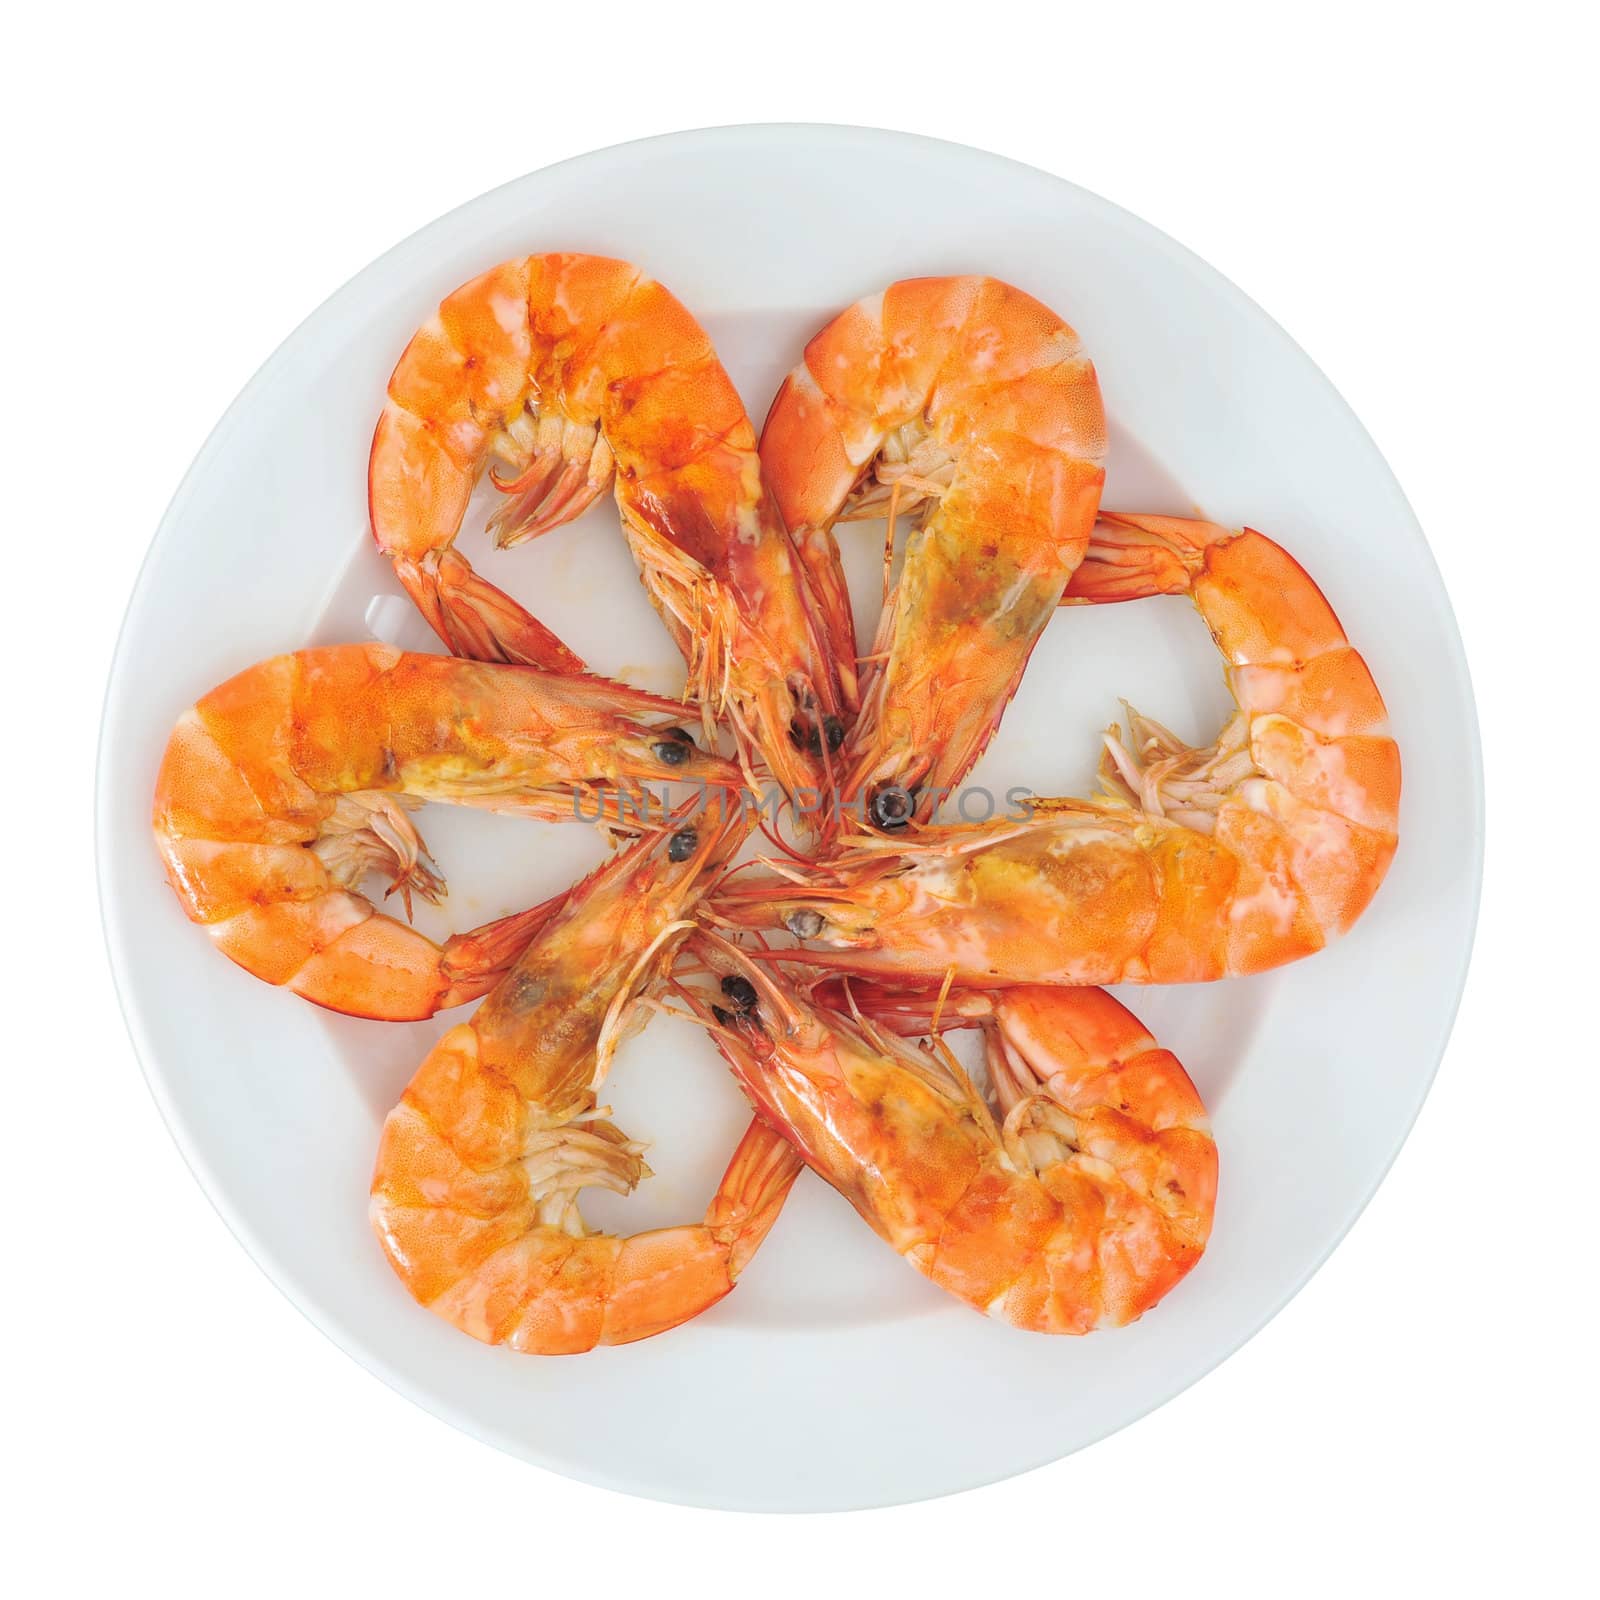 Shrimp with clipping path